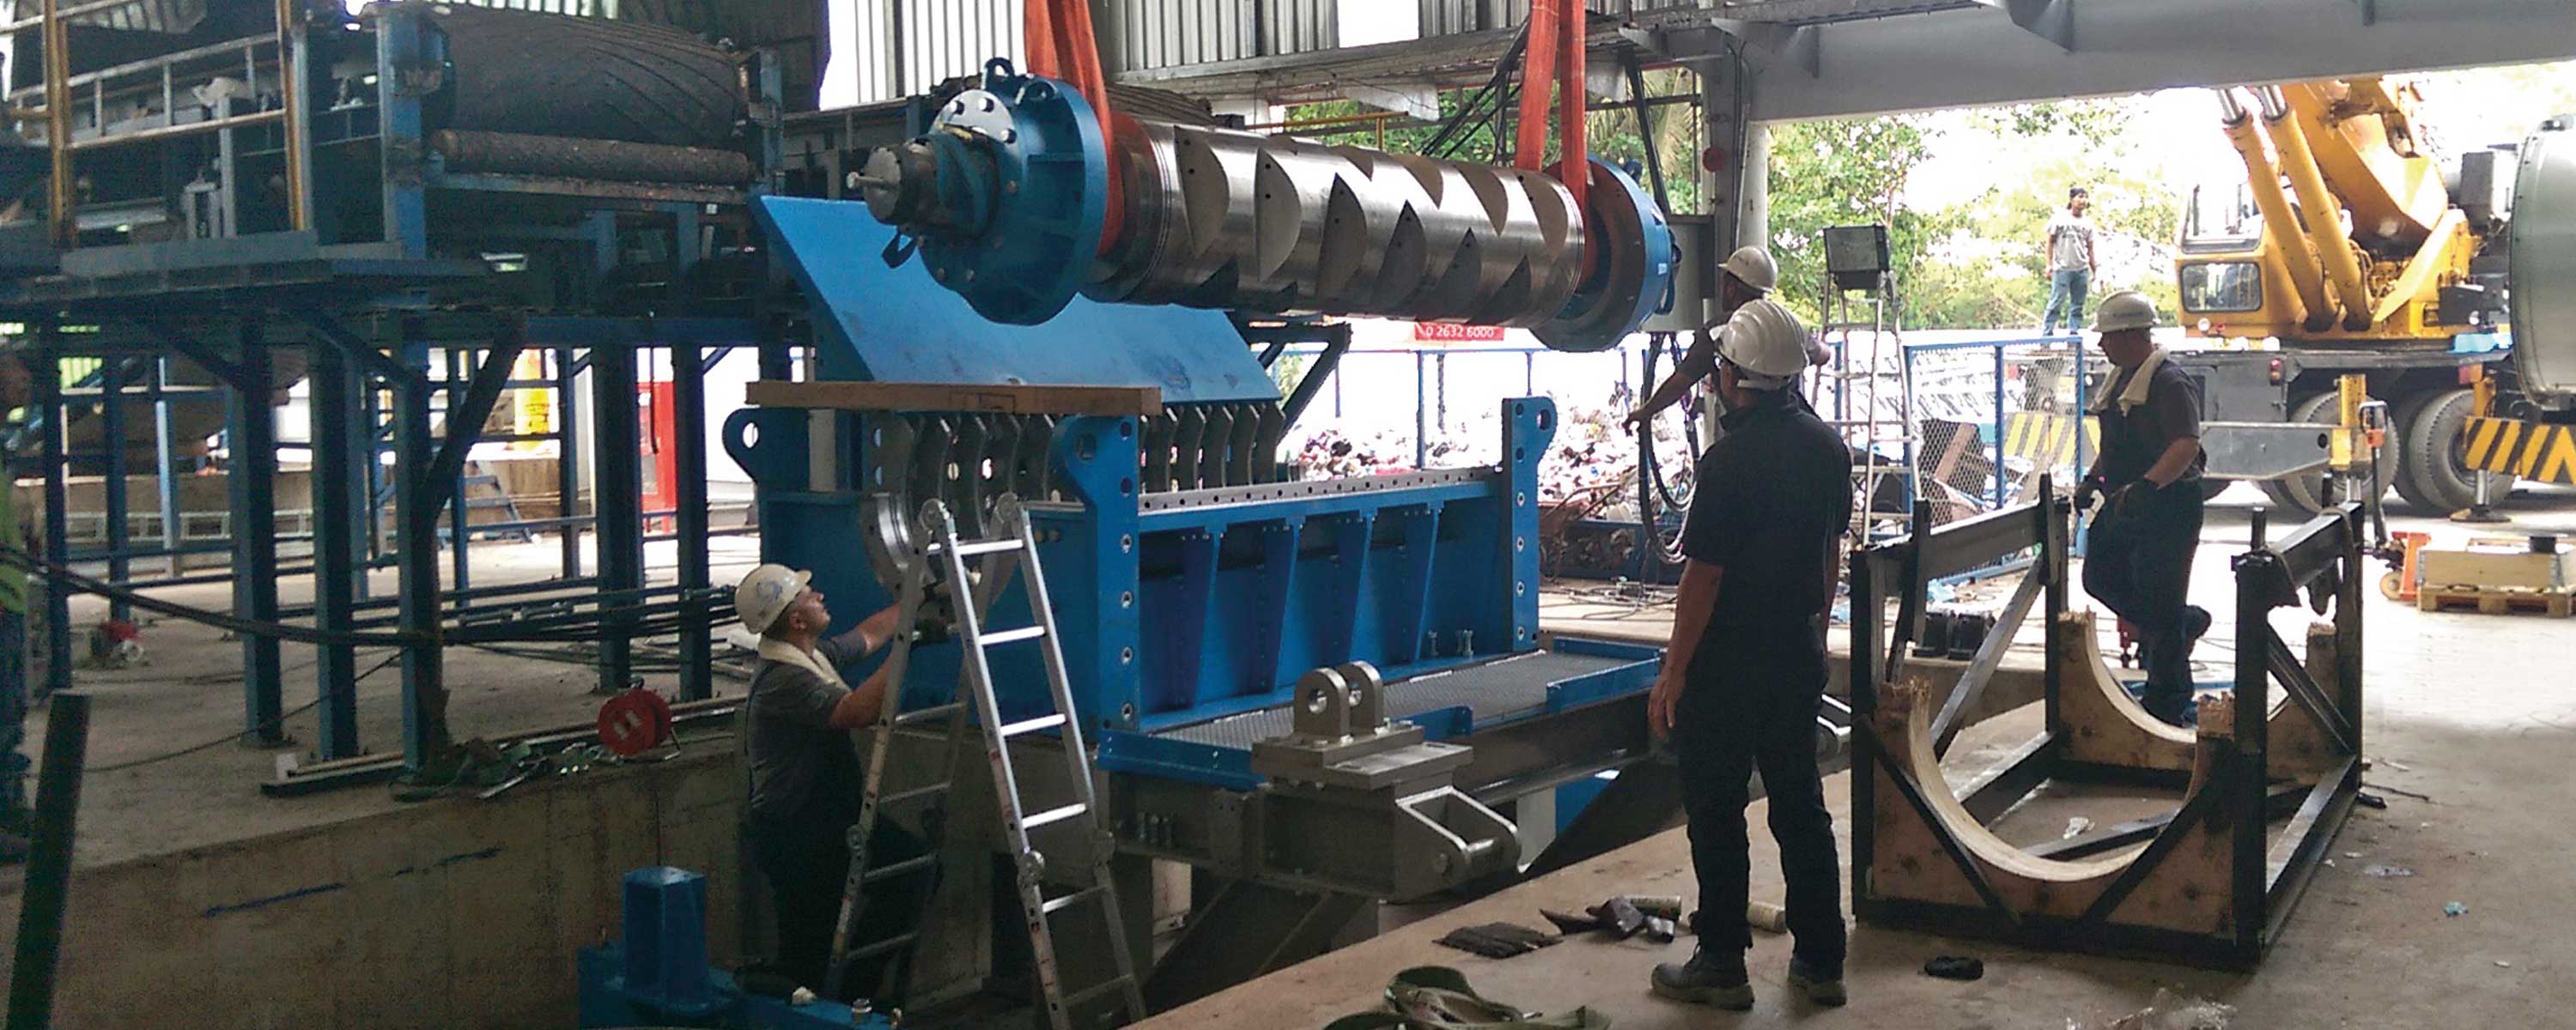 Shaft being lowered into a recycling machine